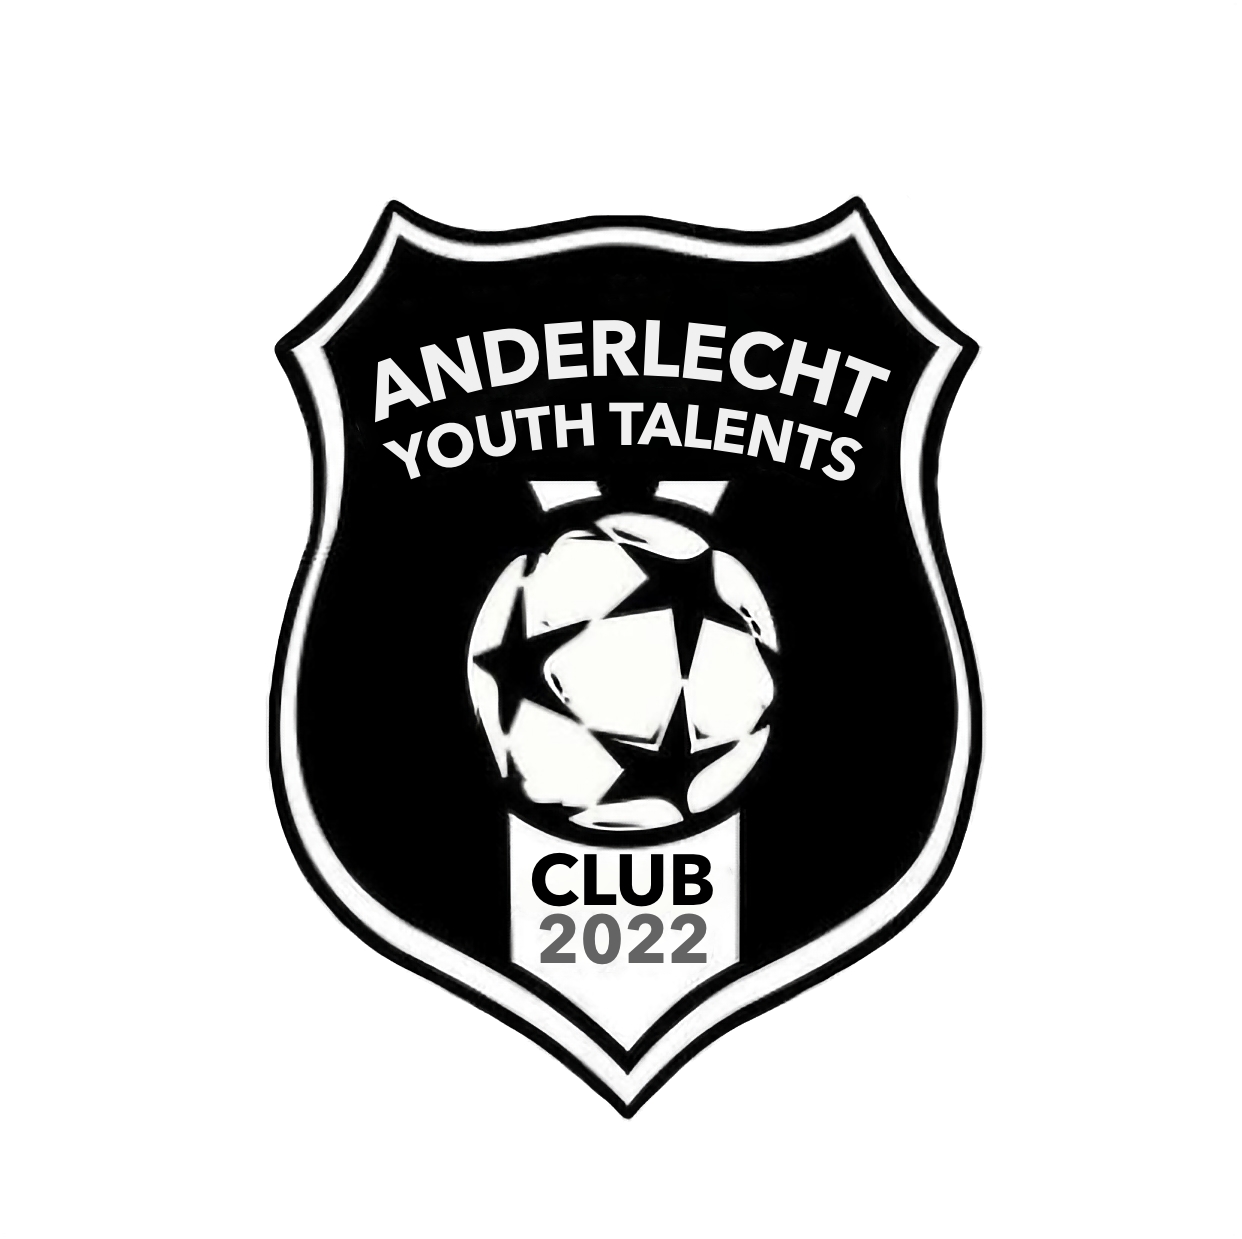 8 - Anderlecht Youth Talents